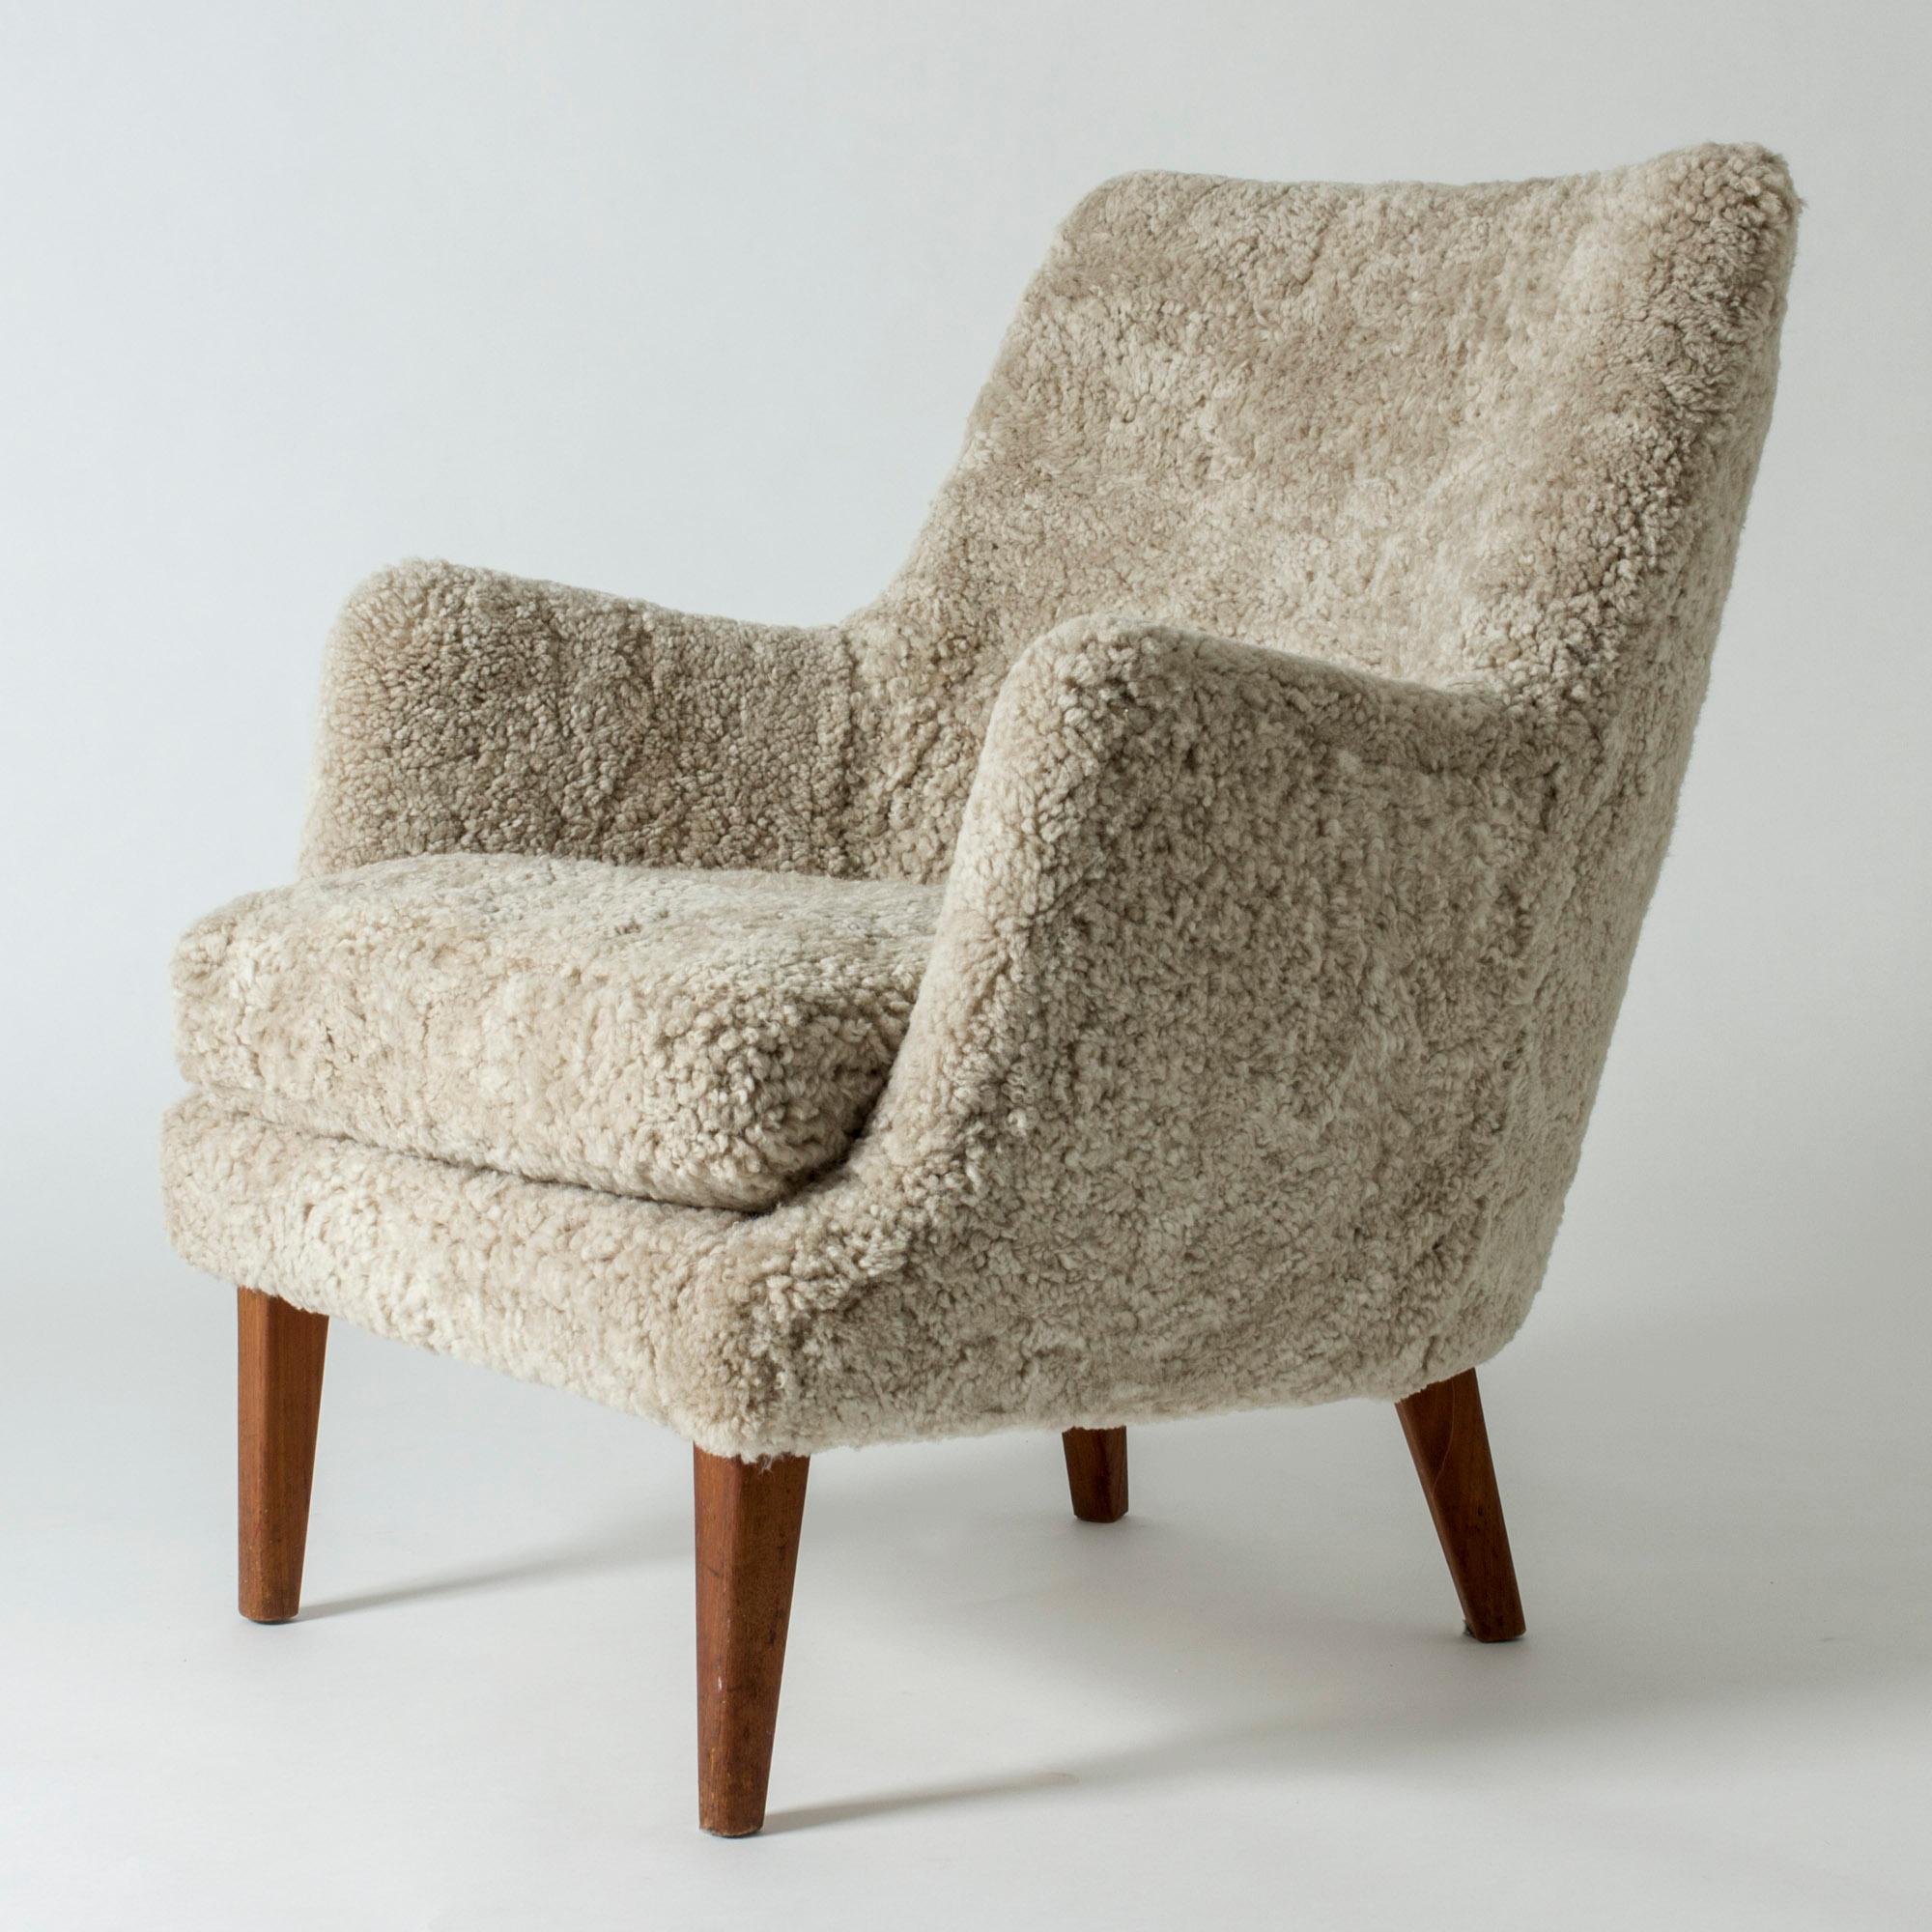 Lounge chair by Arne Vodder in a small, neat design. Upholstered with sheepskin.